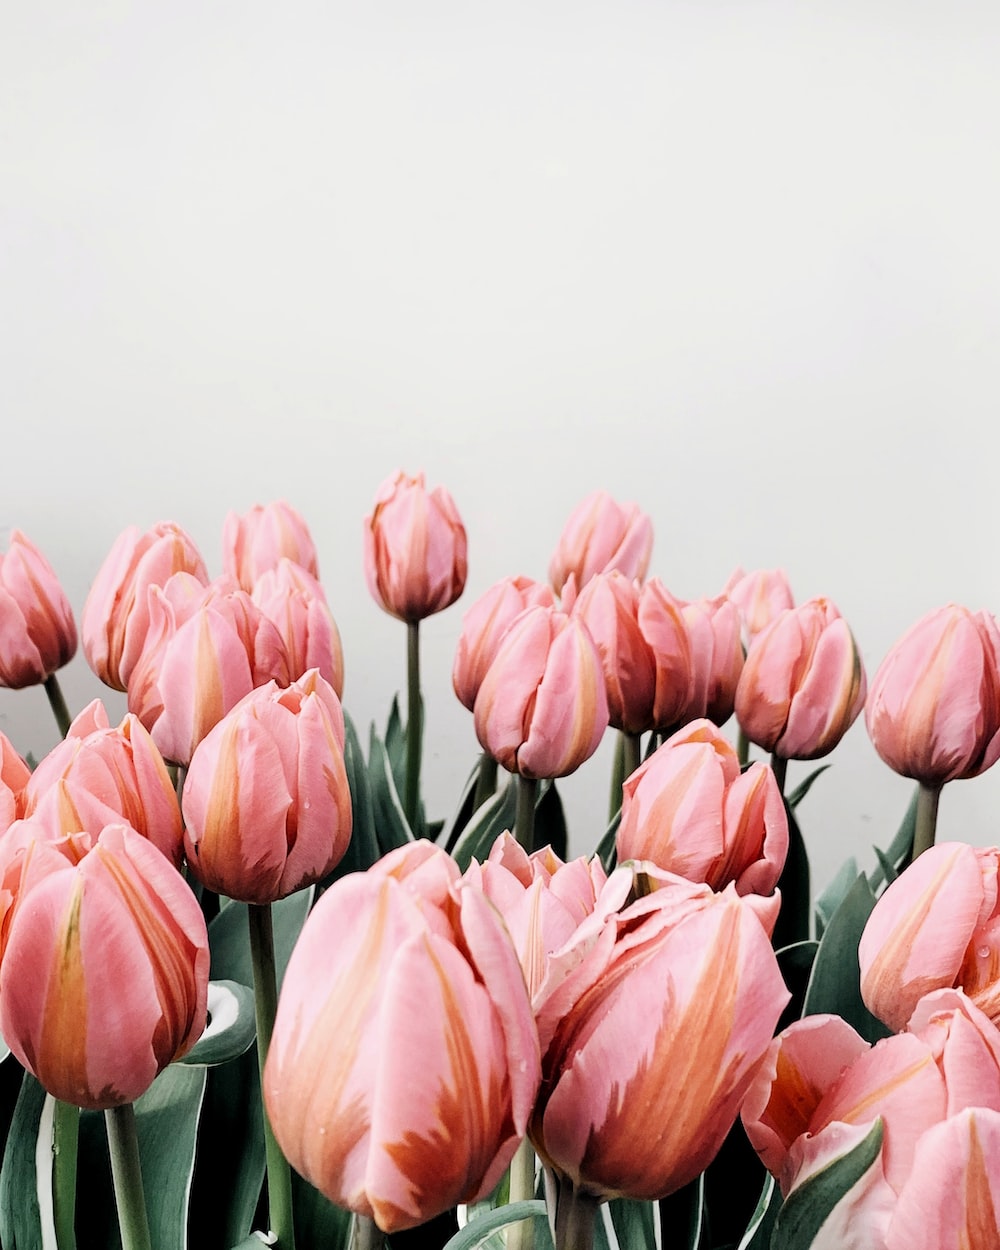 Pink Tulips Picture. Download Free Image